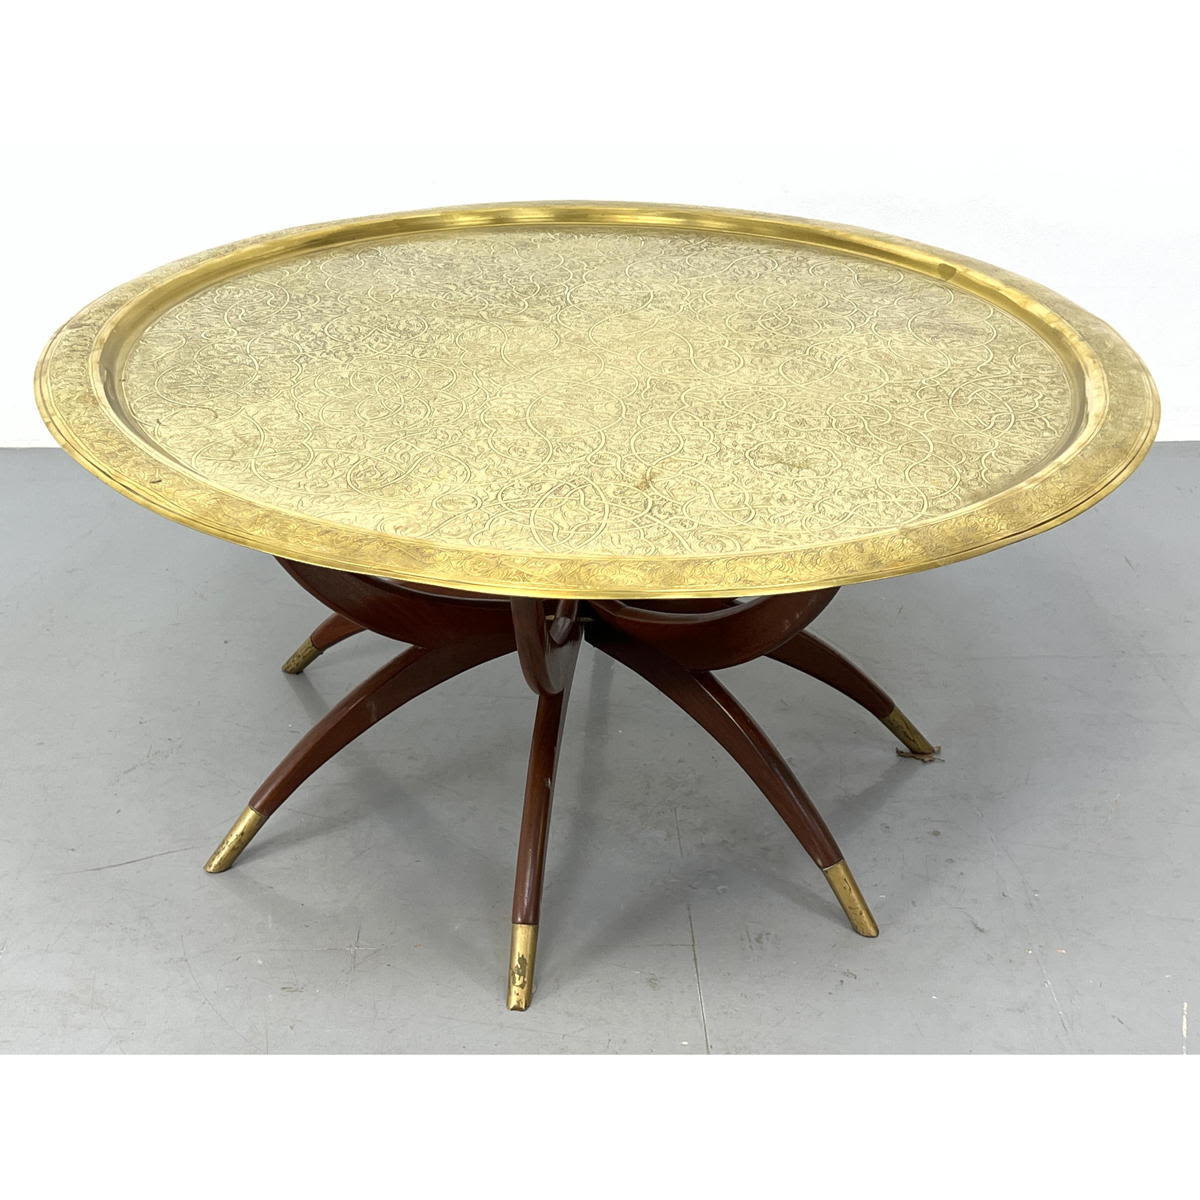 Brass tray spider leg coffee table.